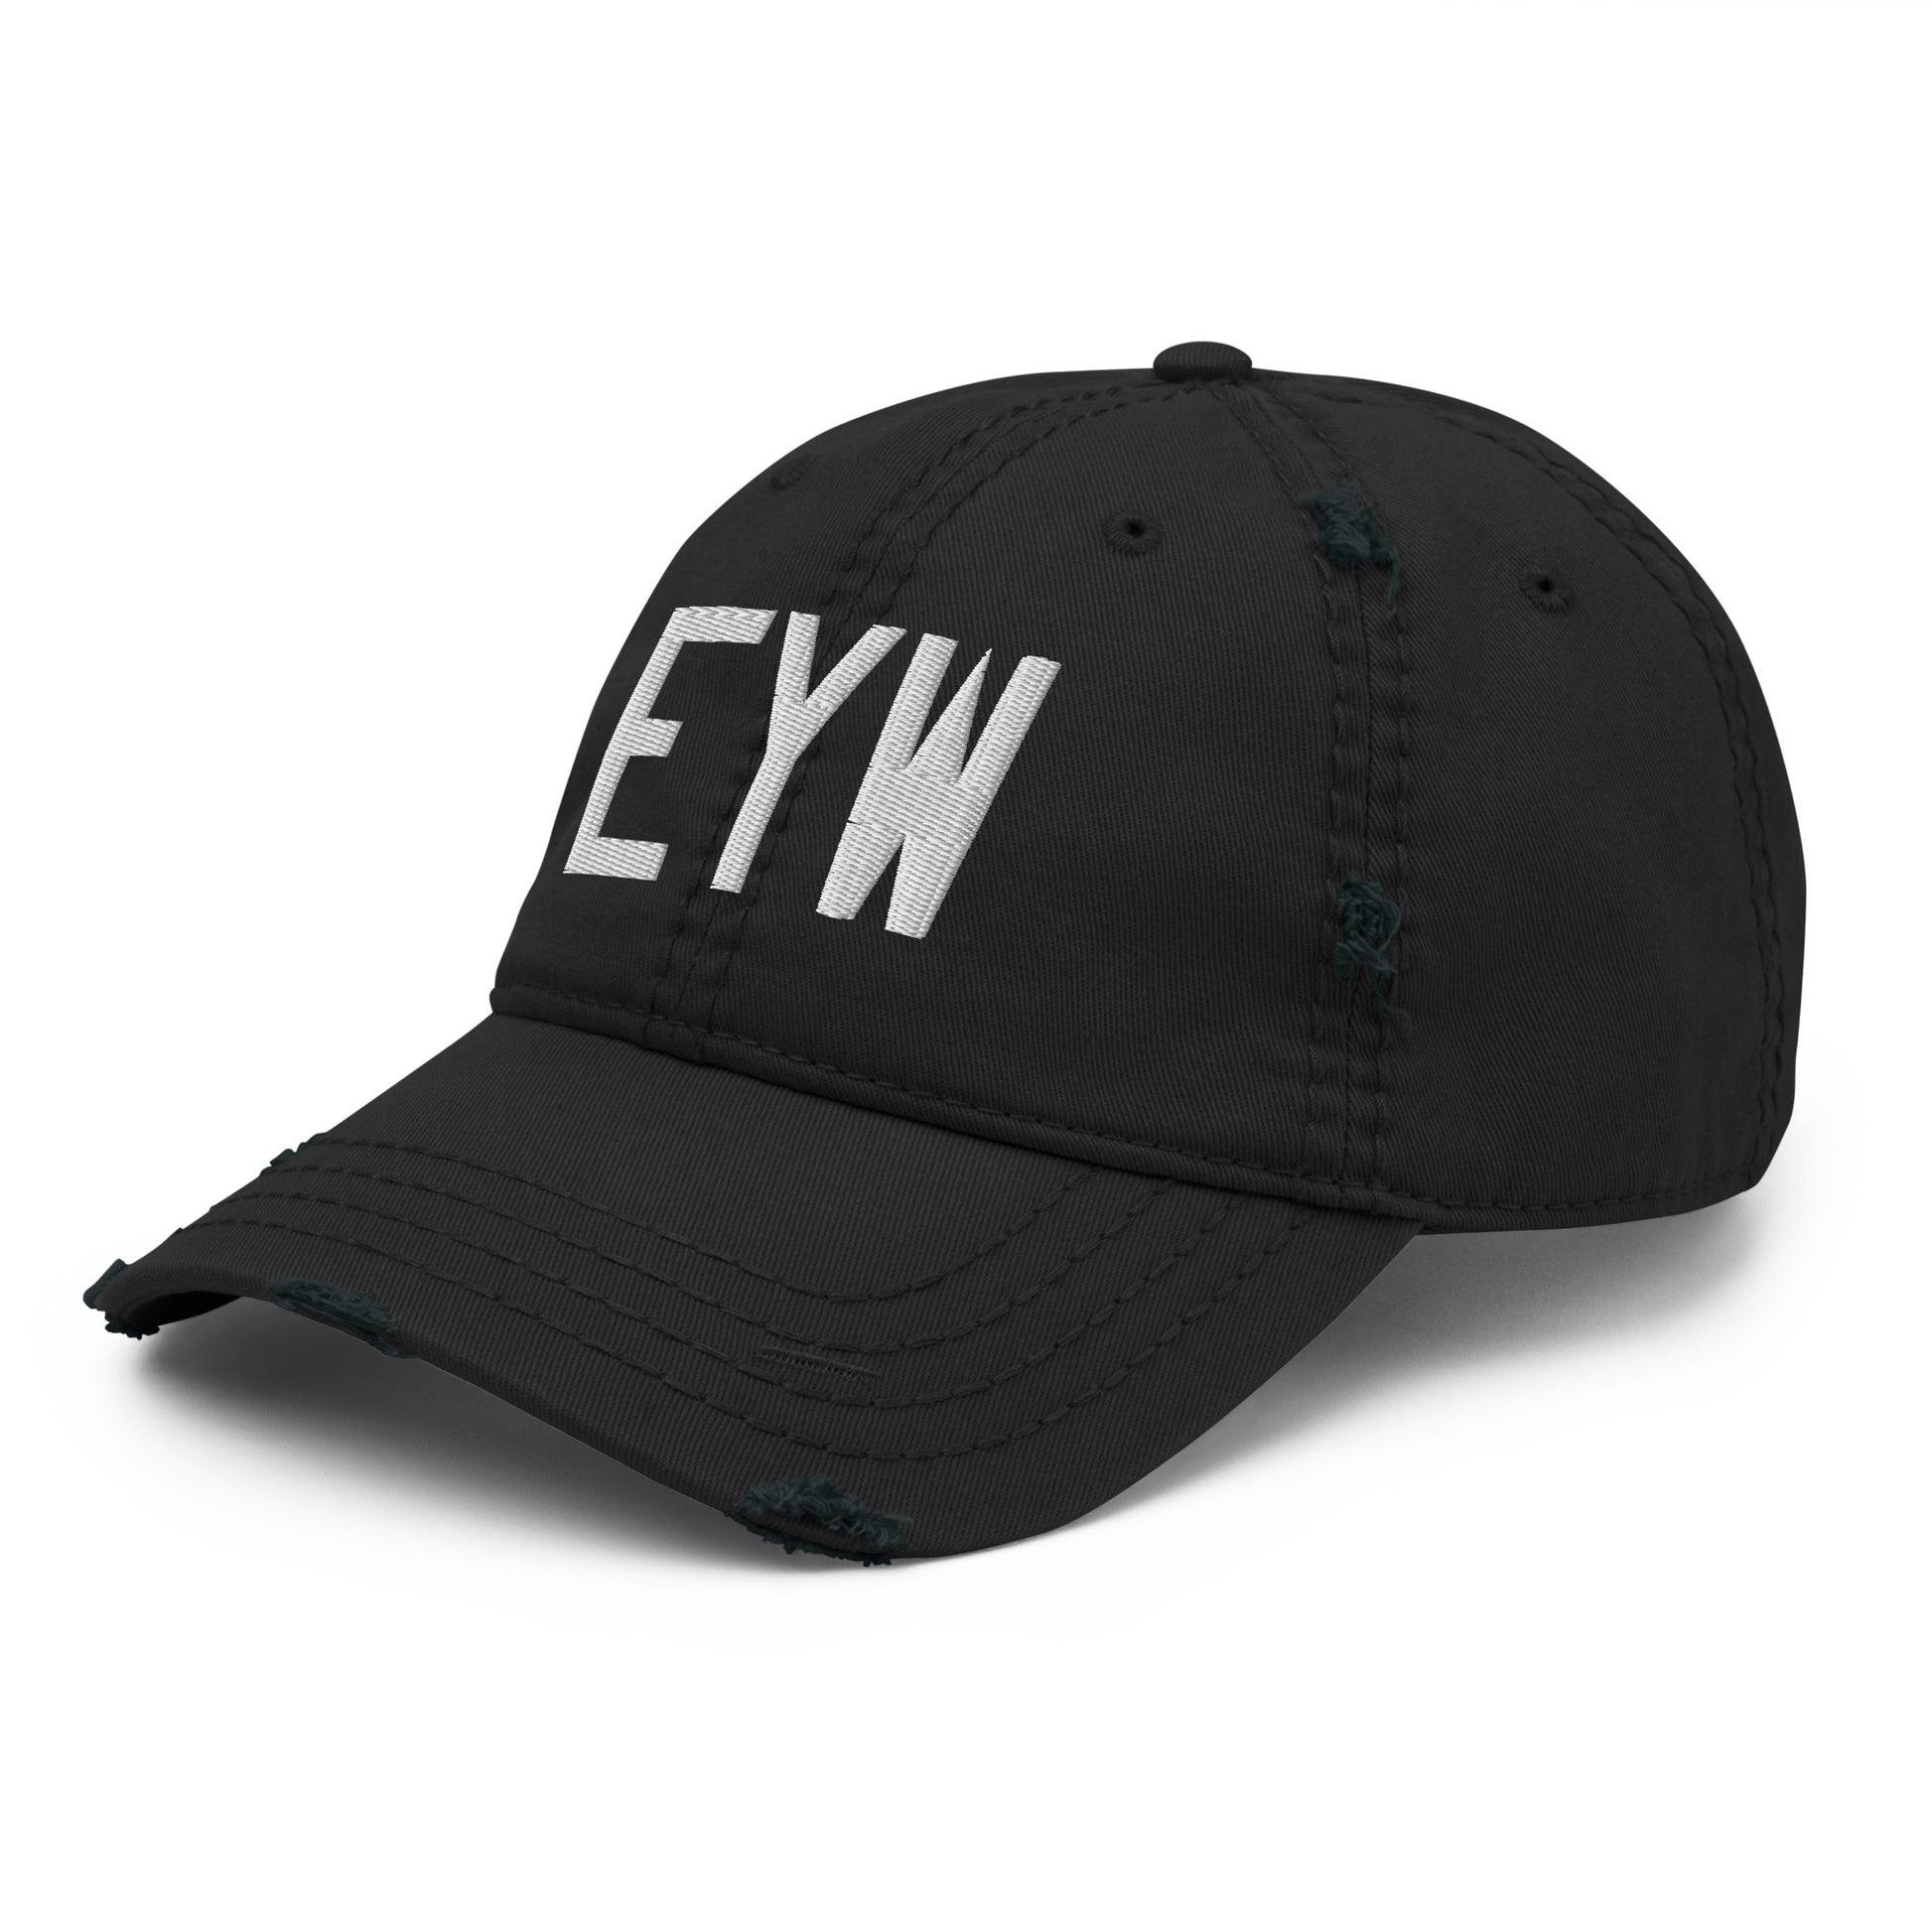 Airport Code Distressed Hat - White • EYW Key West • YHM Designs - Image 11